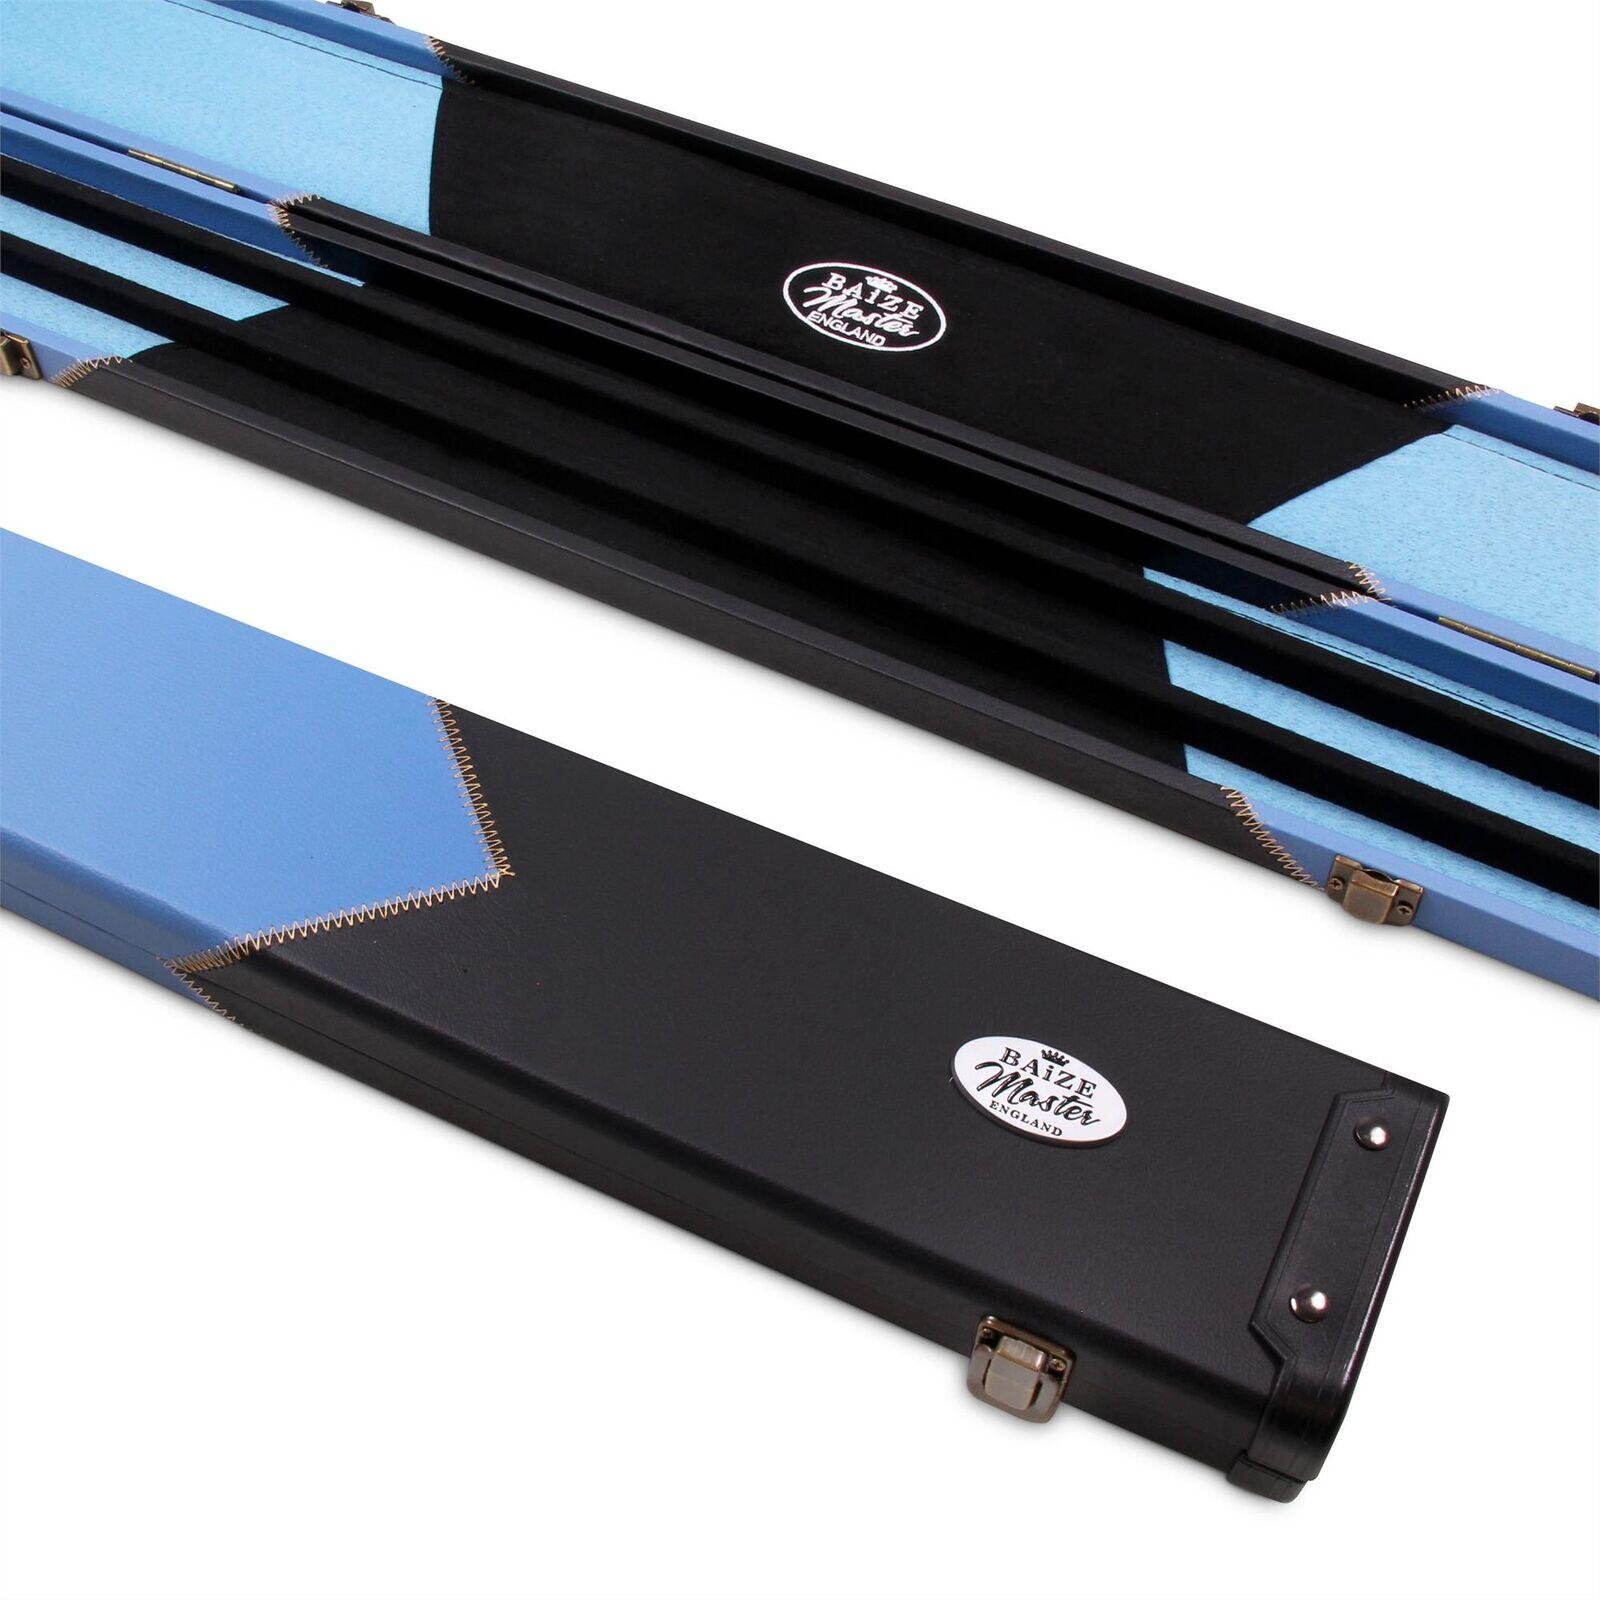 Baize Master 1 Piece WIDE SKY BLUE ARROW Snooker Pool Cue Case - Holds 3 Cues 1/7